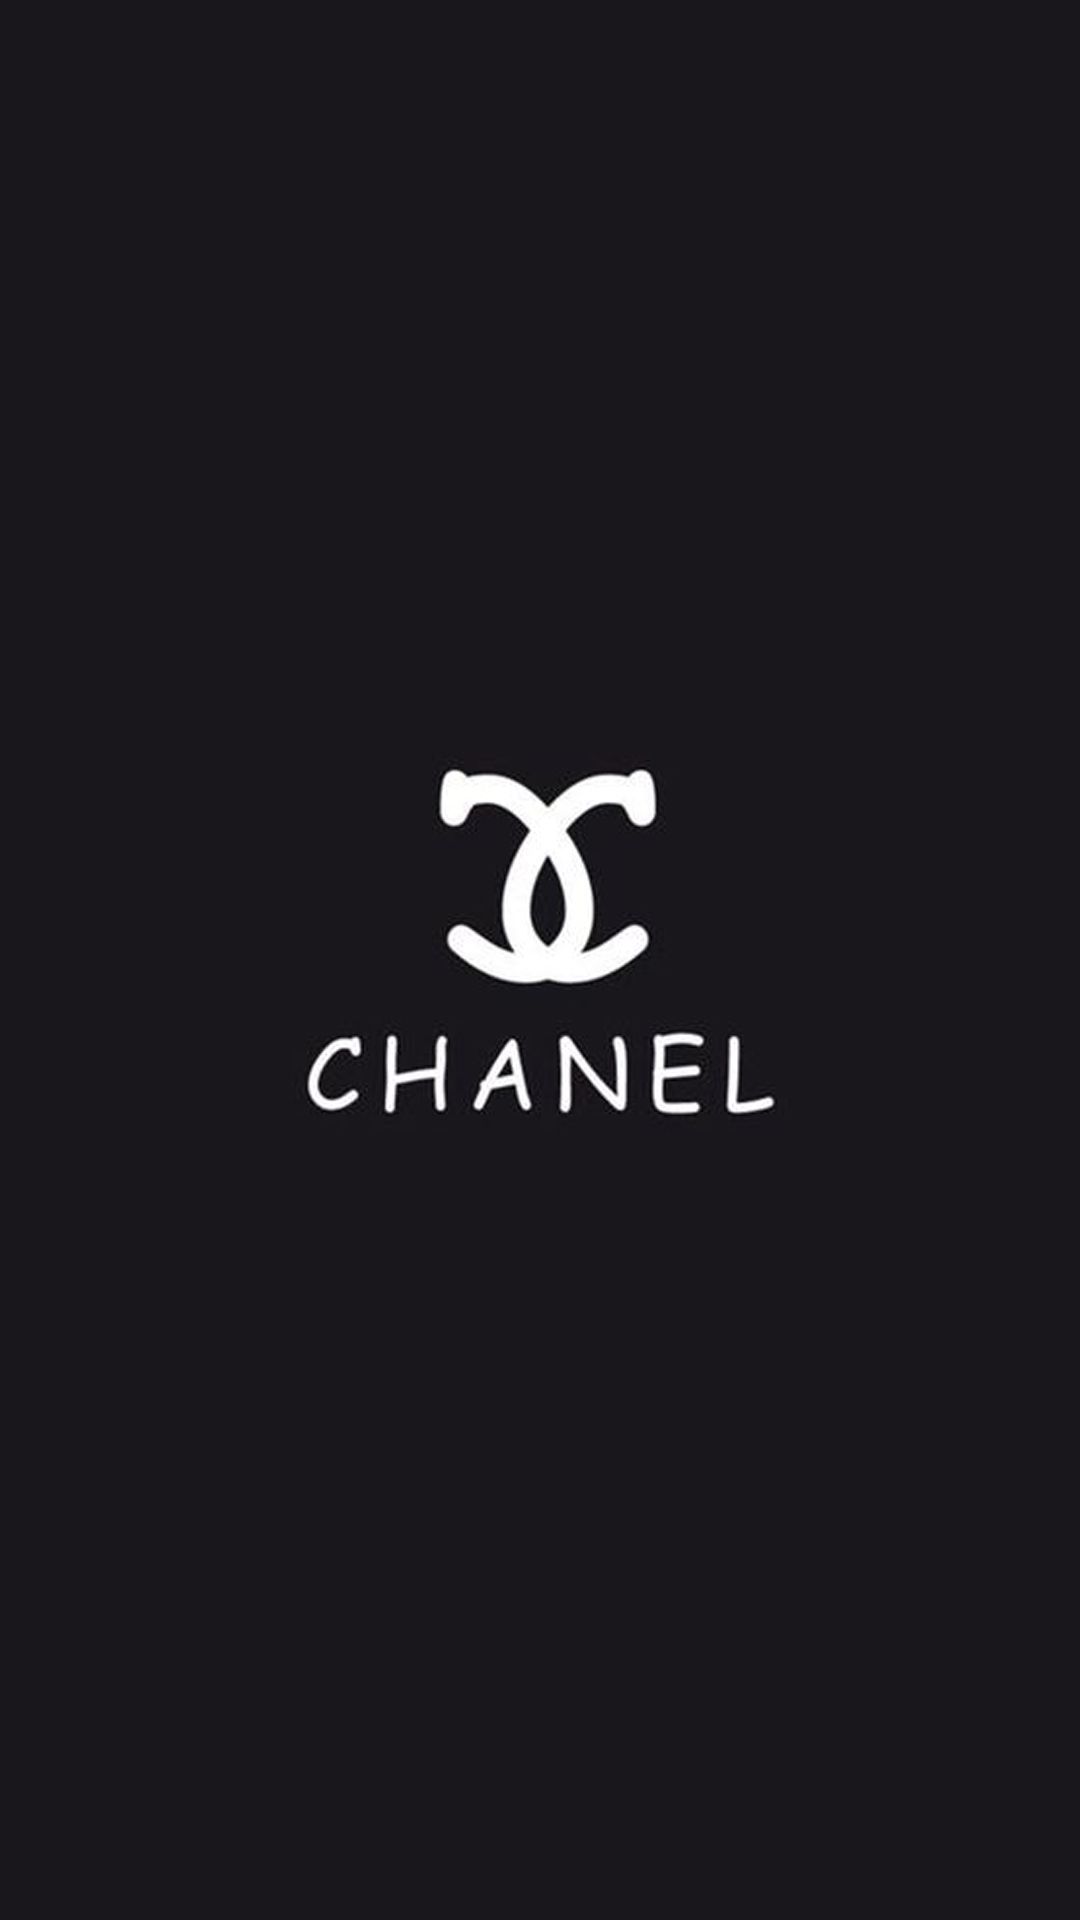 Chanel Iphone Wallpapers